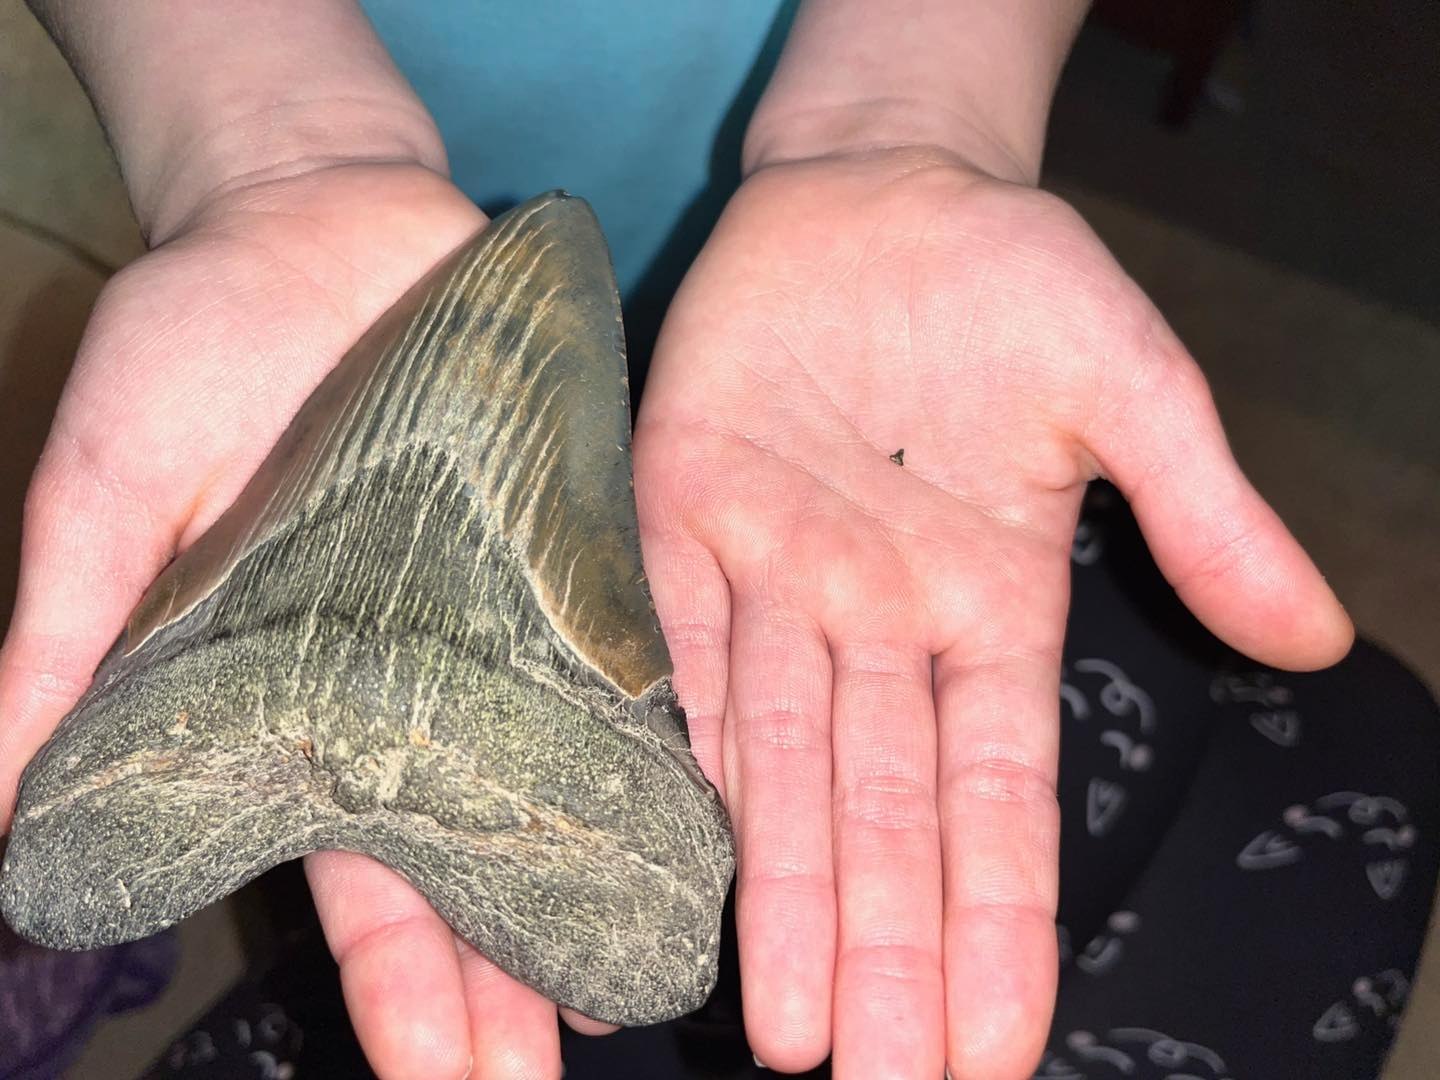 Nine-year-old spotted rare 15-million-year-old shark tooth 3